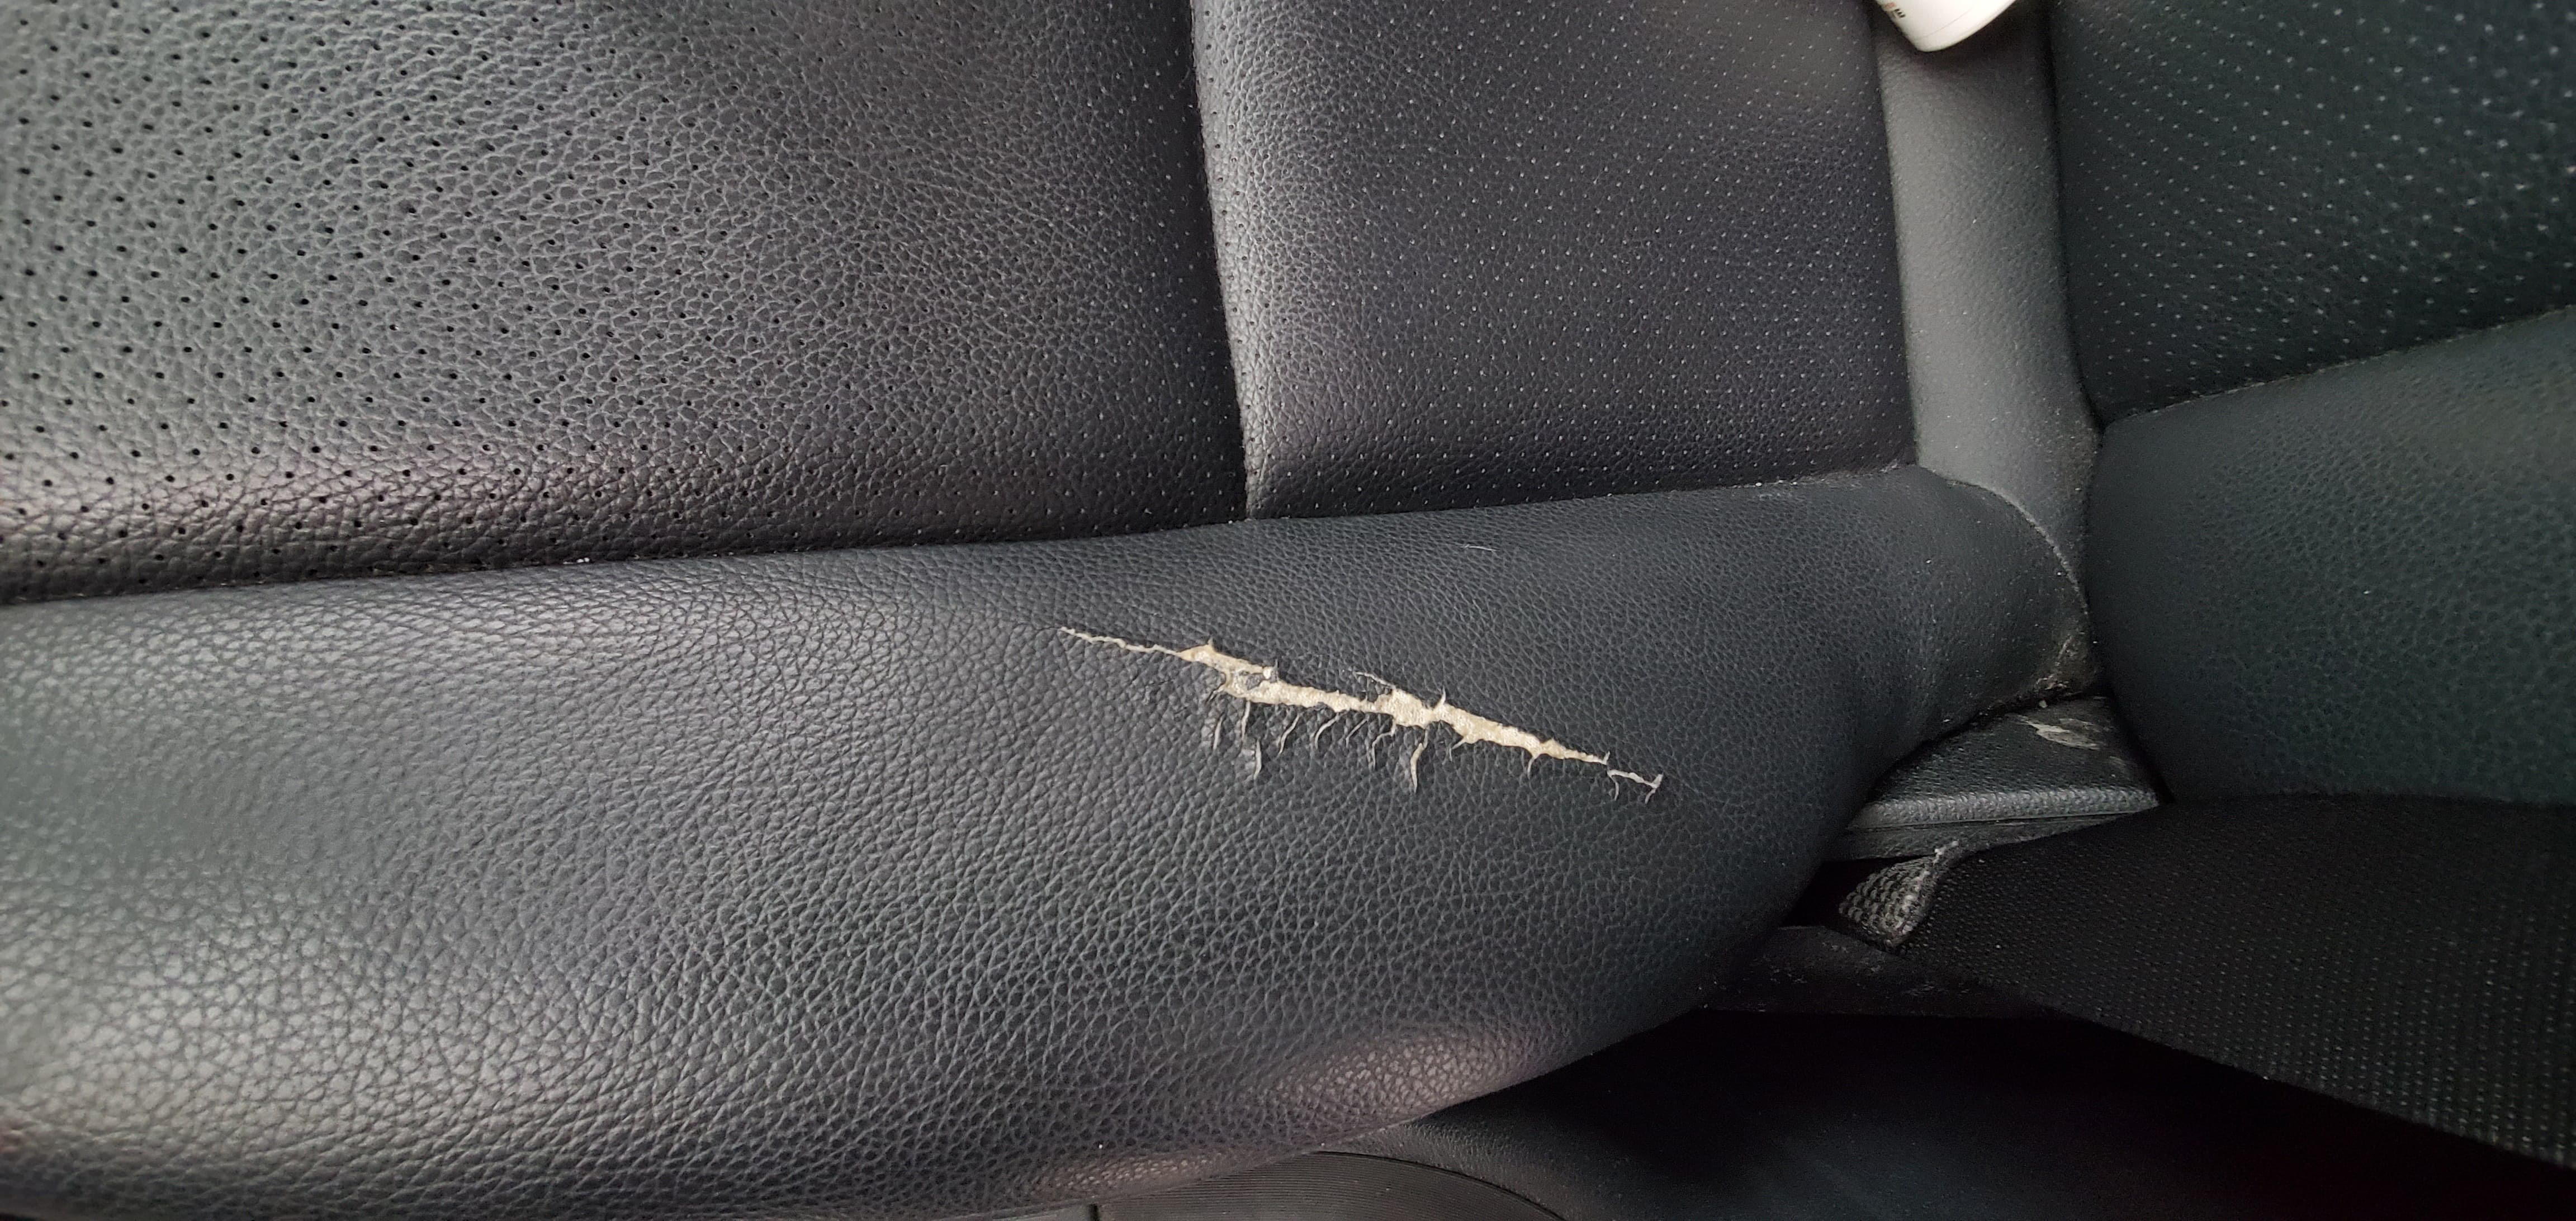 How To Repair A Leather Car Seat - How To Fix Small Hole In Leather Car Seat